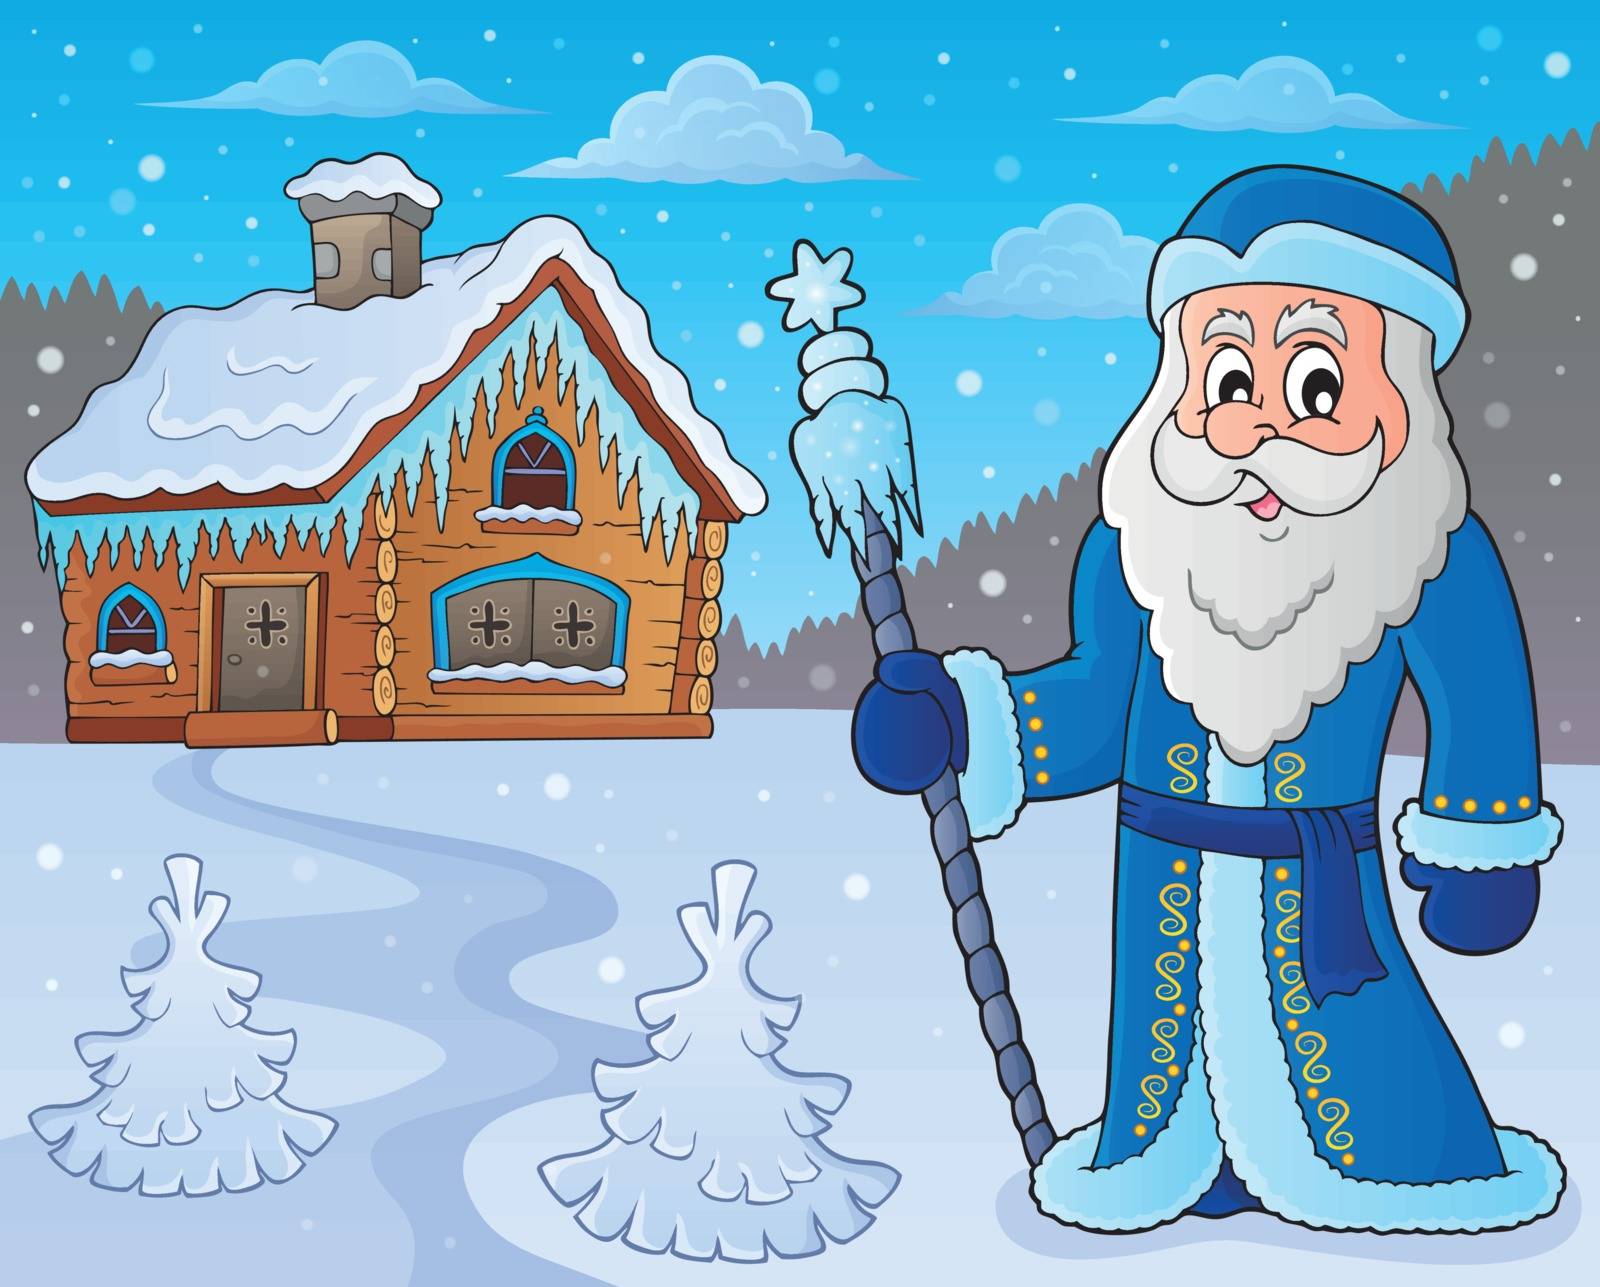 Father Frost theme image 7 by clairev